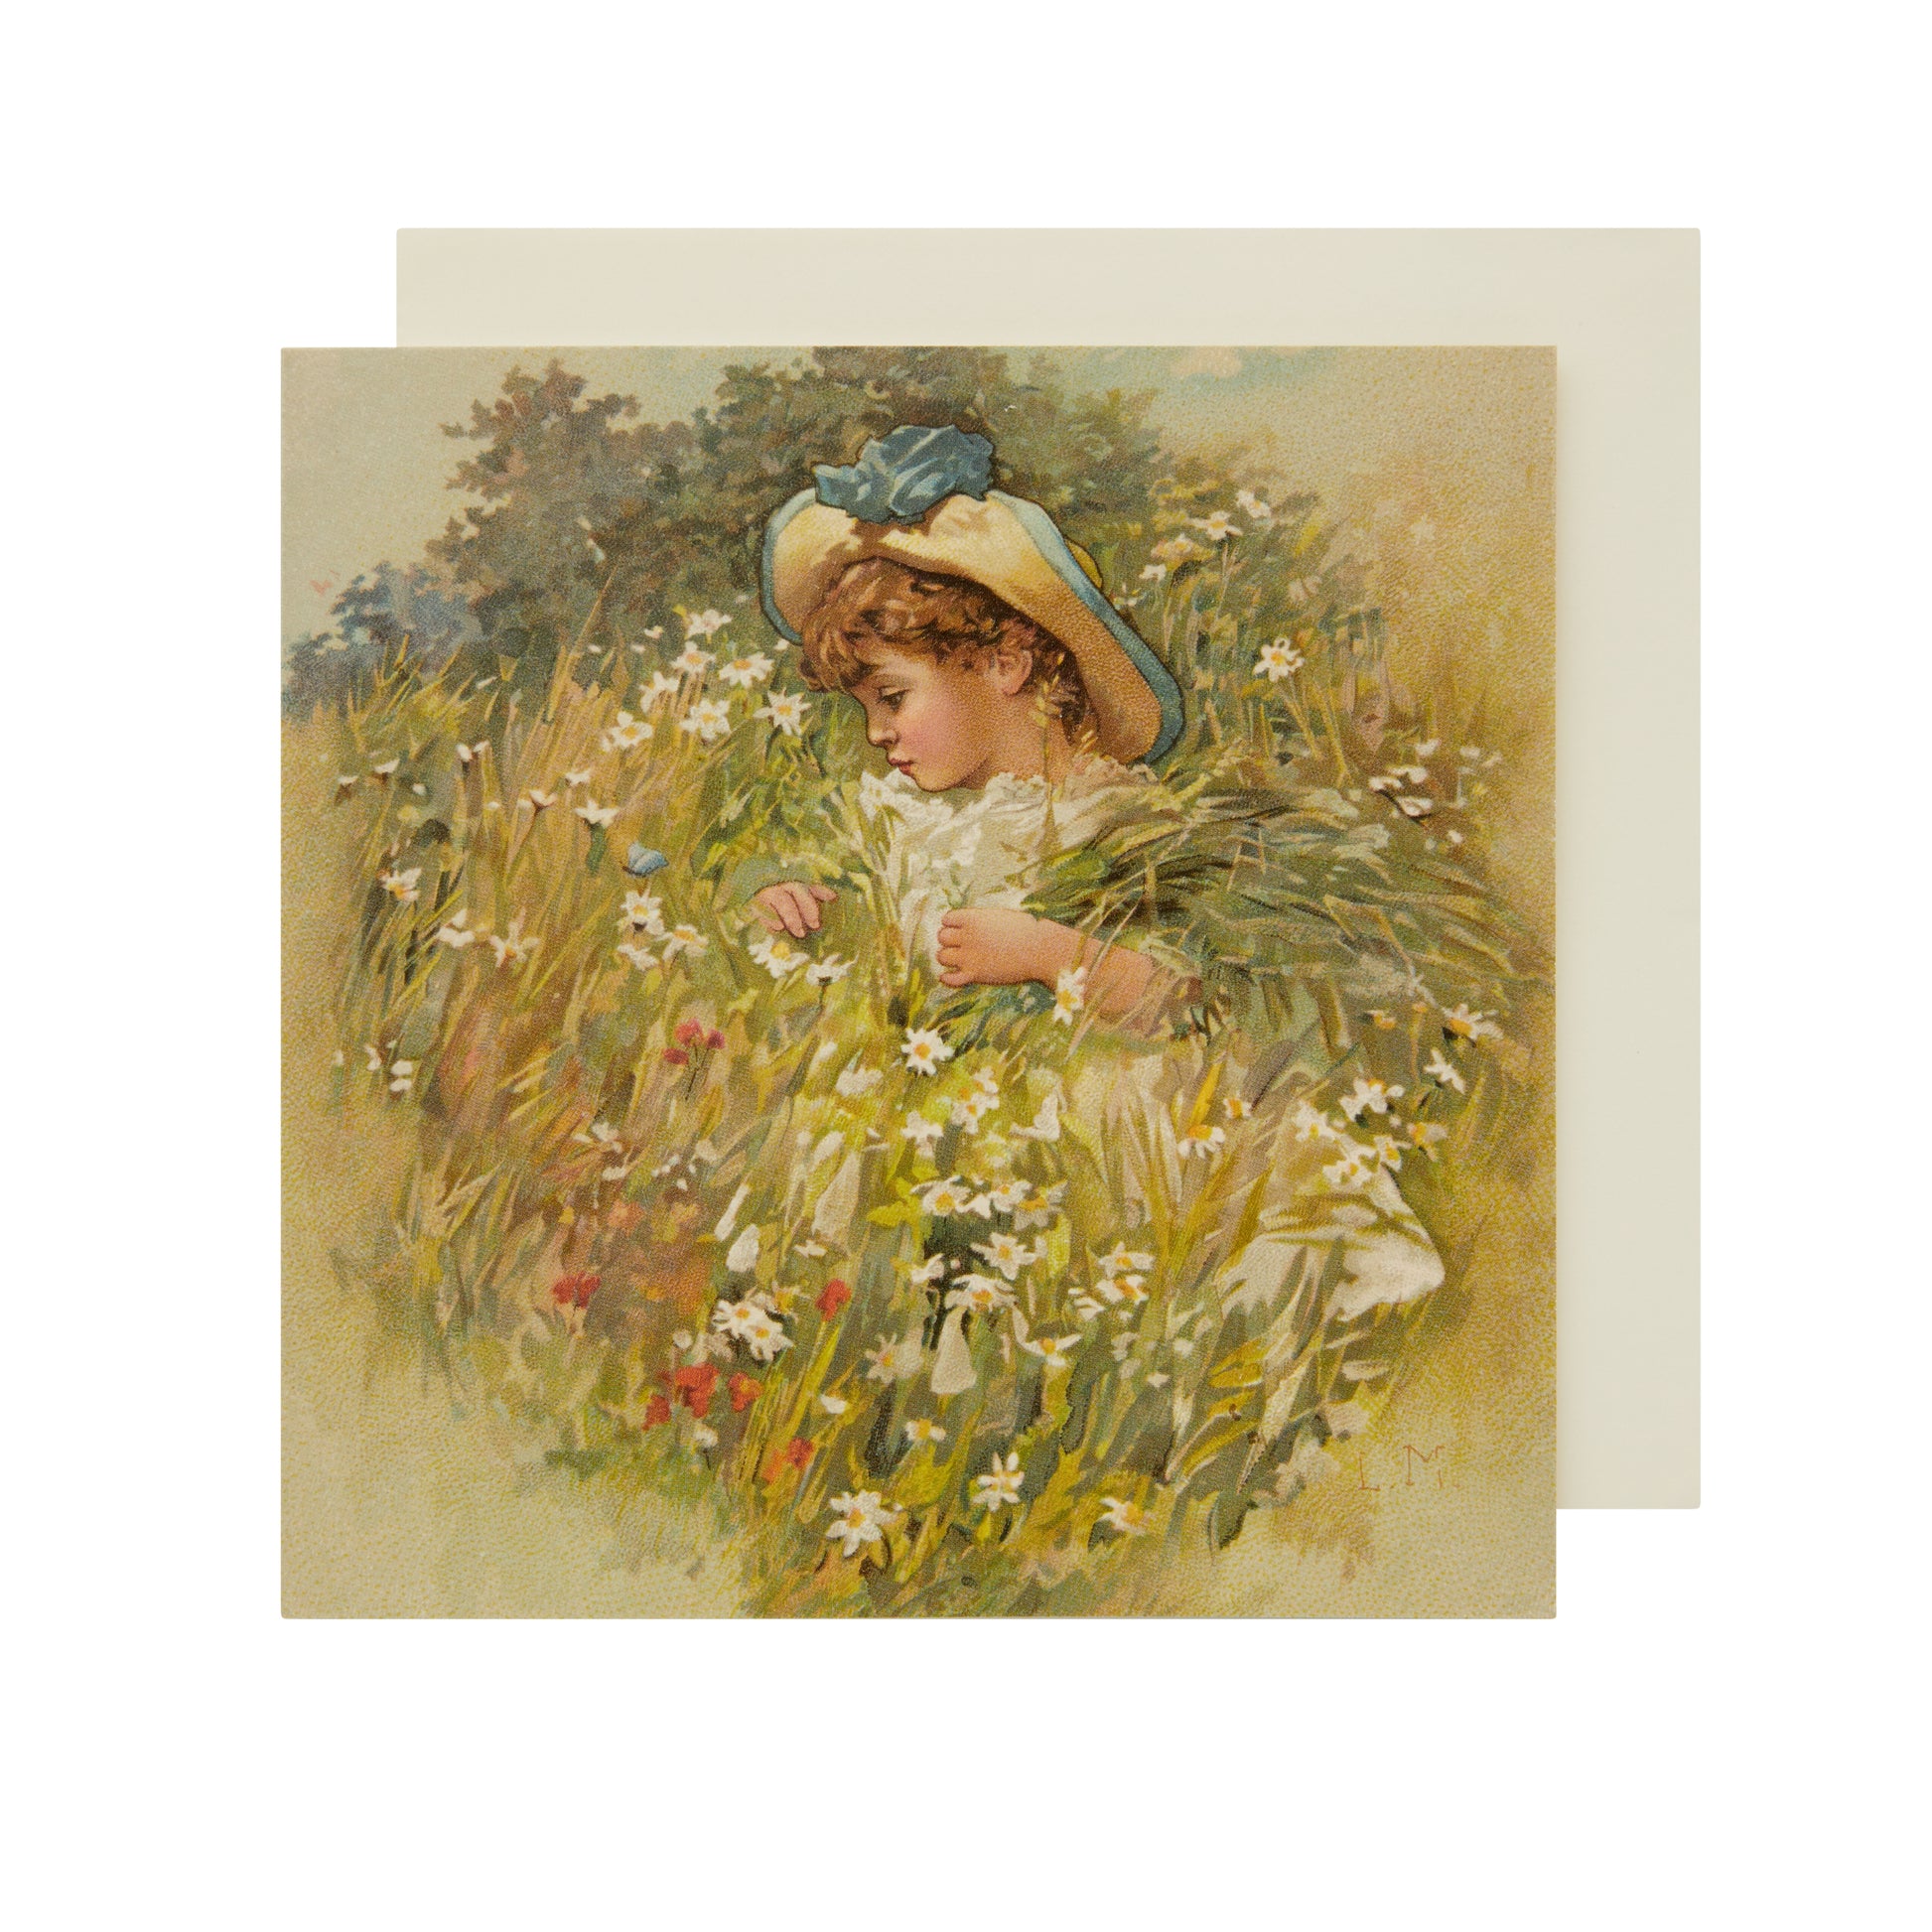 Square greeting card with illustration of a girl amongst grasses and meadow flowers. Brought to you by CuratingCambridge.co.uk